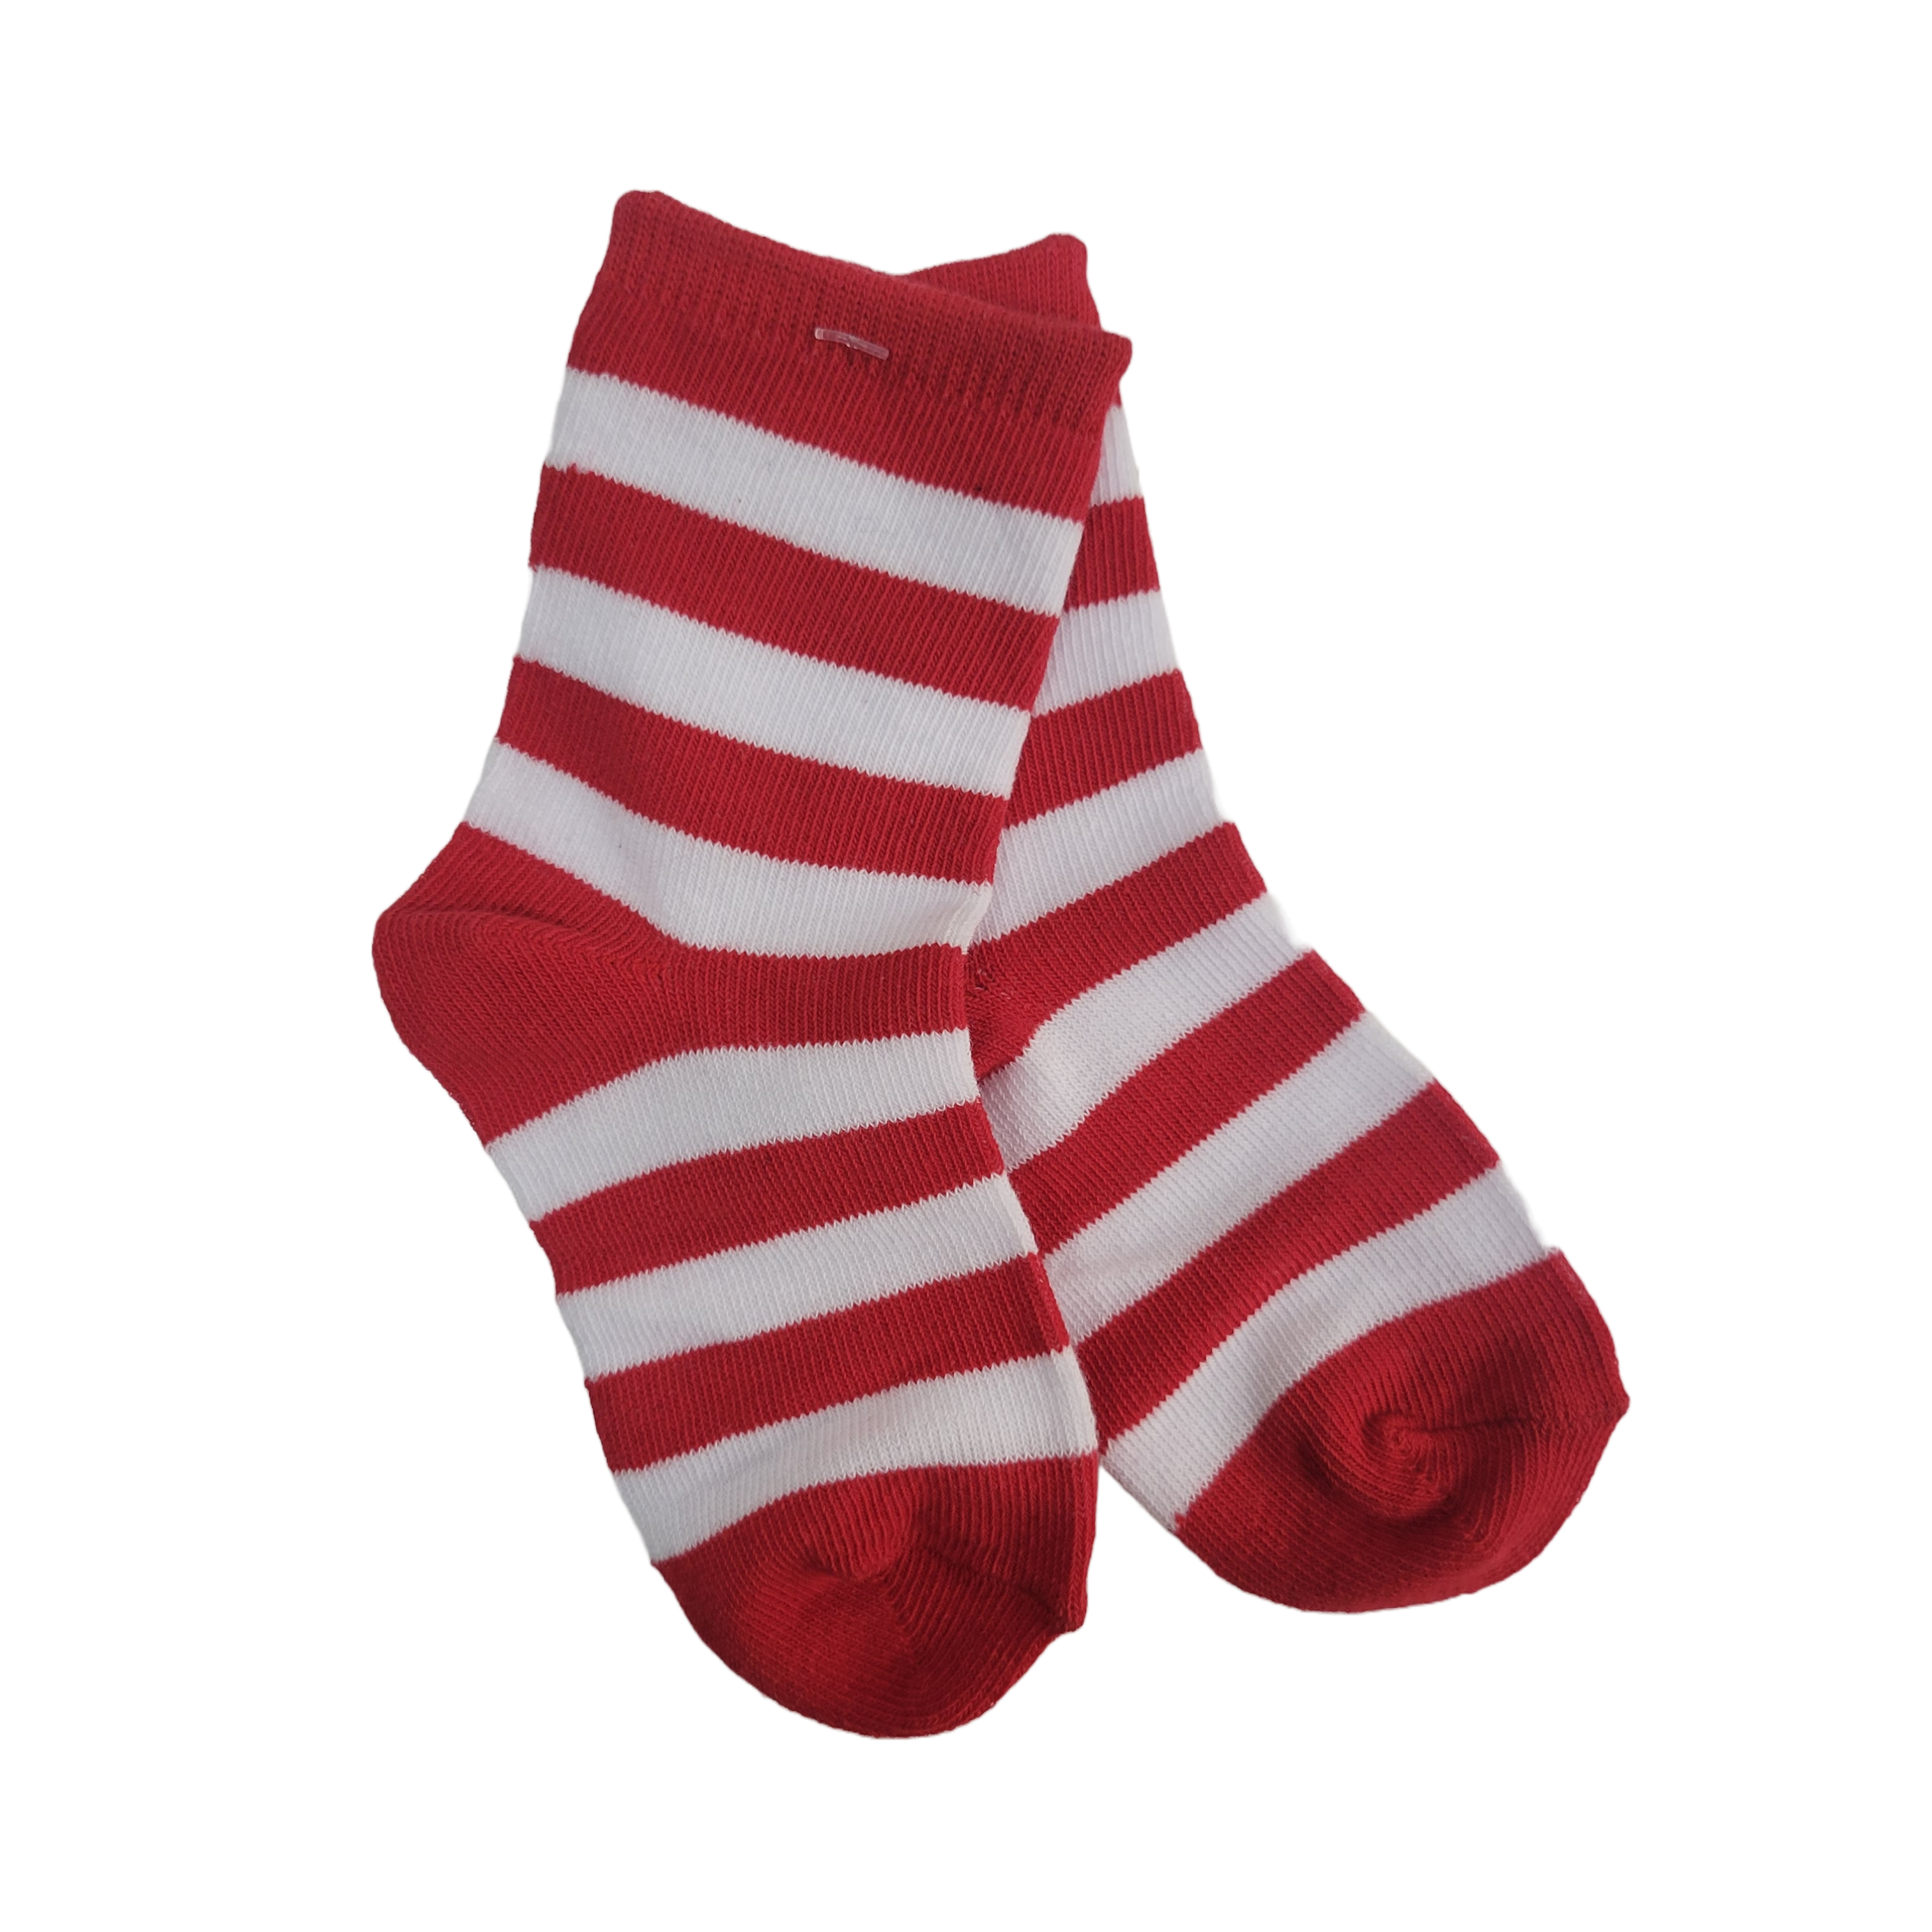 Red and White Striped Holiday Socks (Ages 3-5 & 5-7)